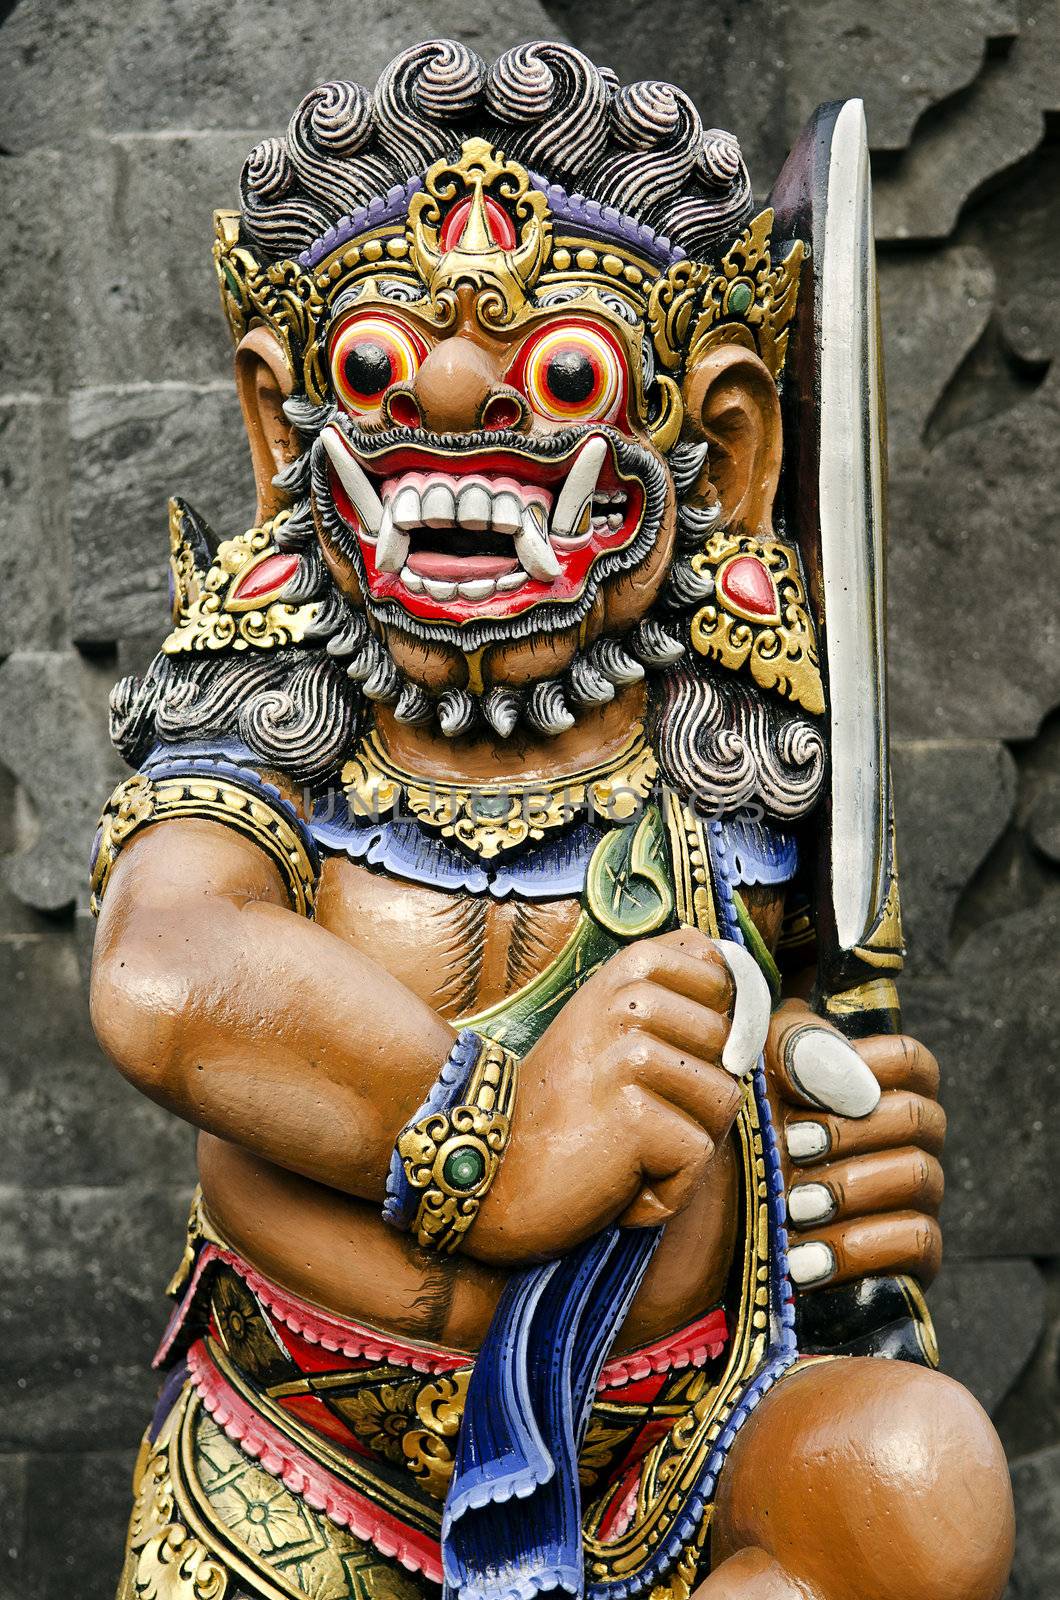 statue in temple bali indonesia by jackmalipan